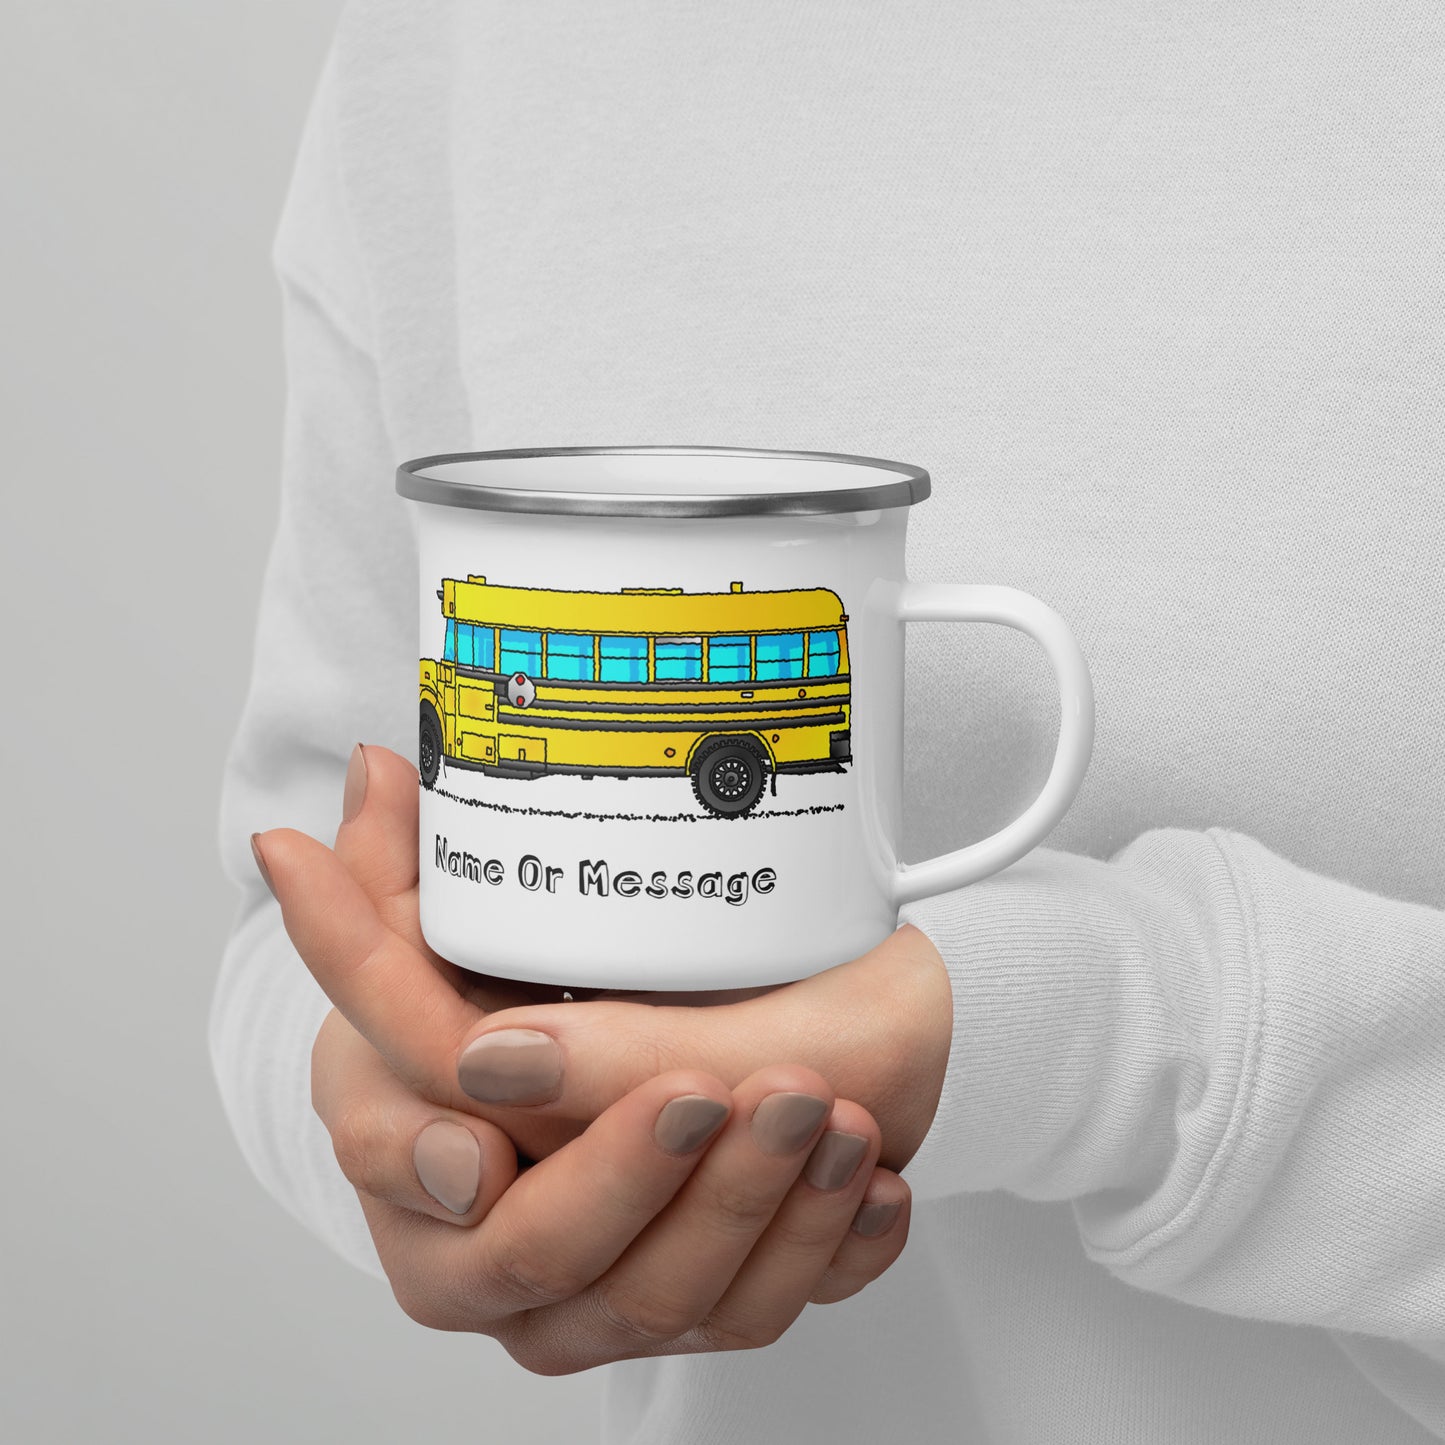 School Bus Mug for Driver or Kids. Enamel Personalized Cup T030